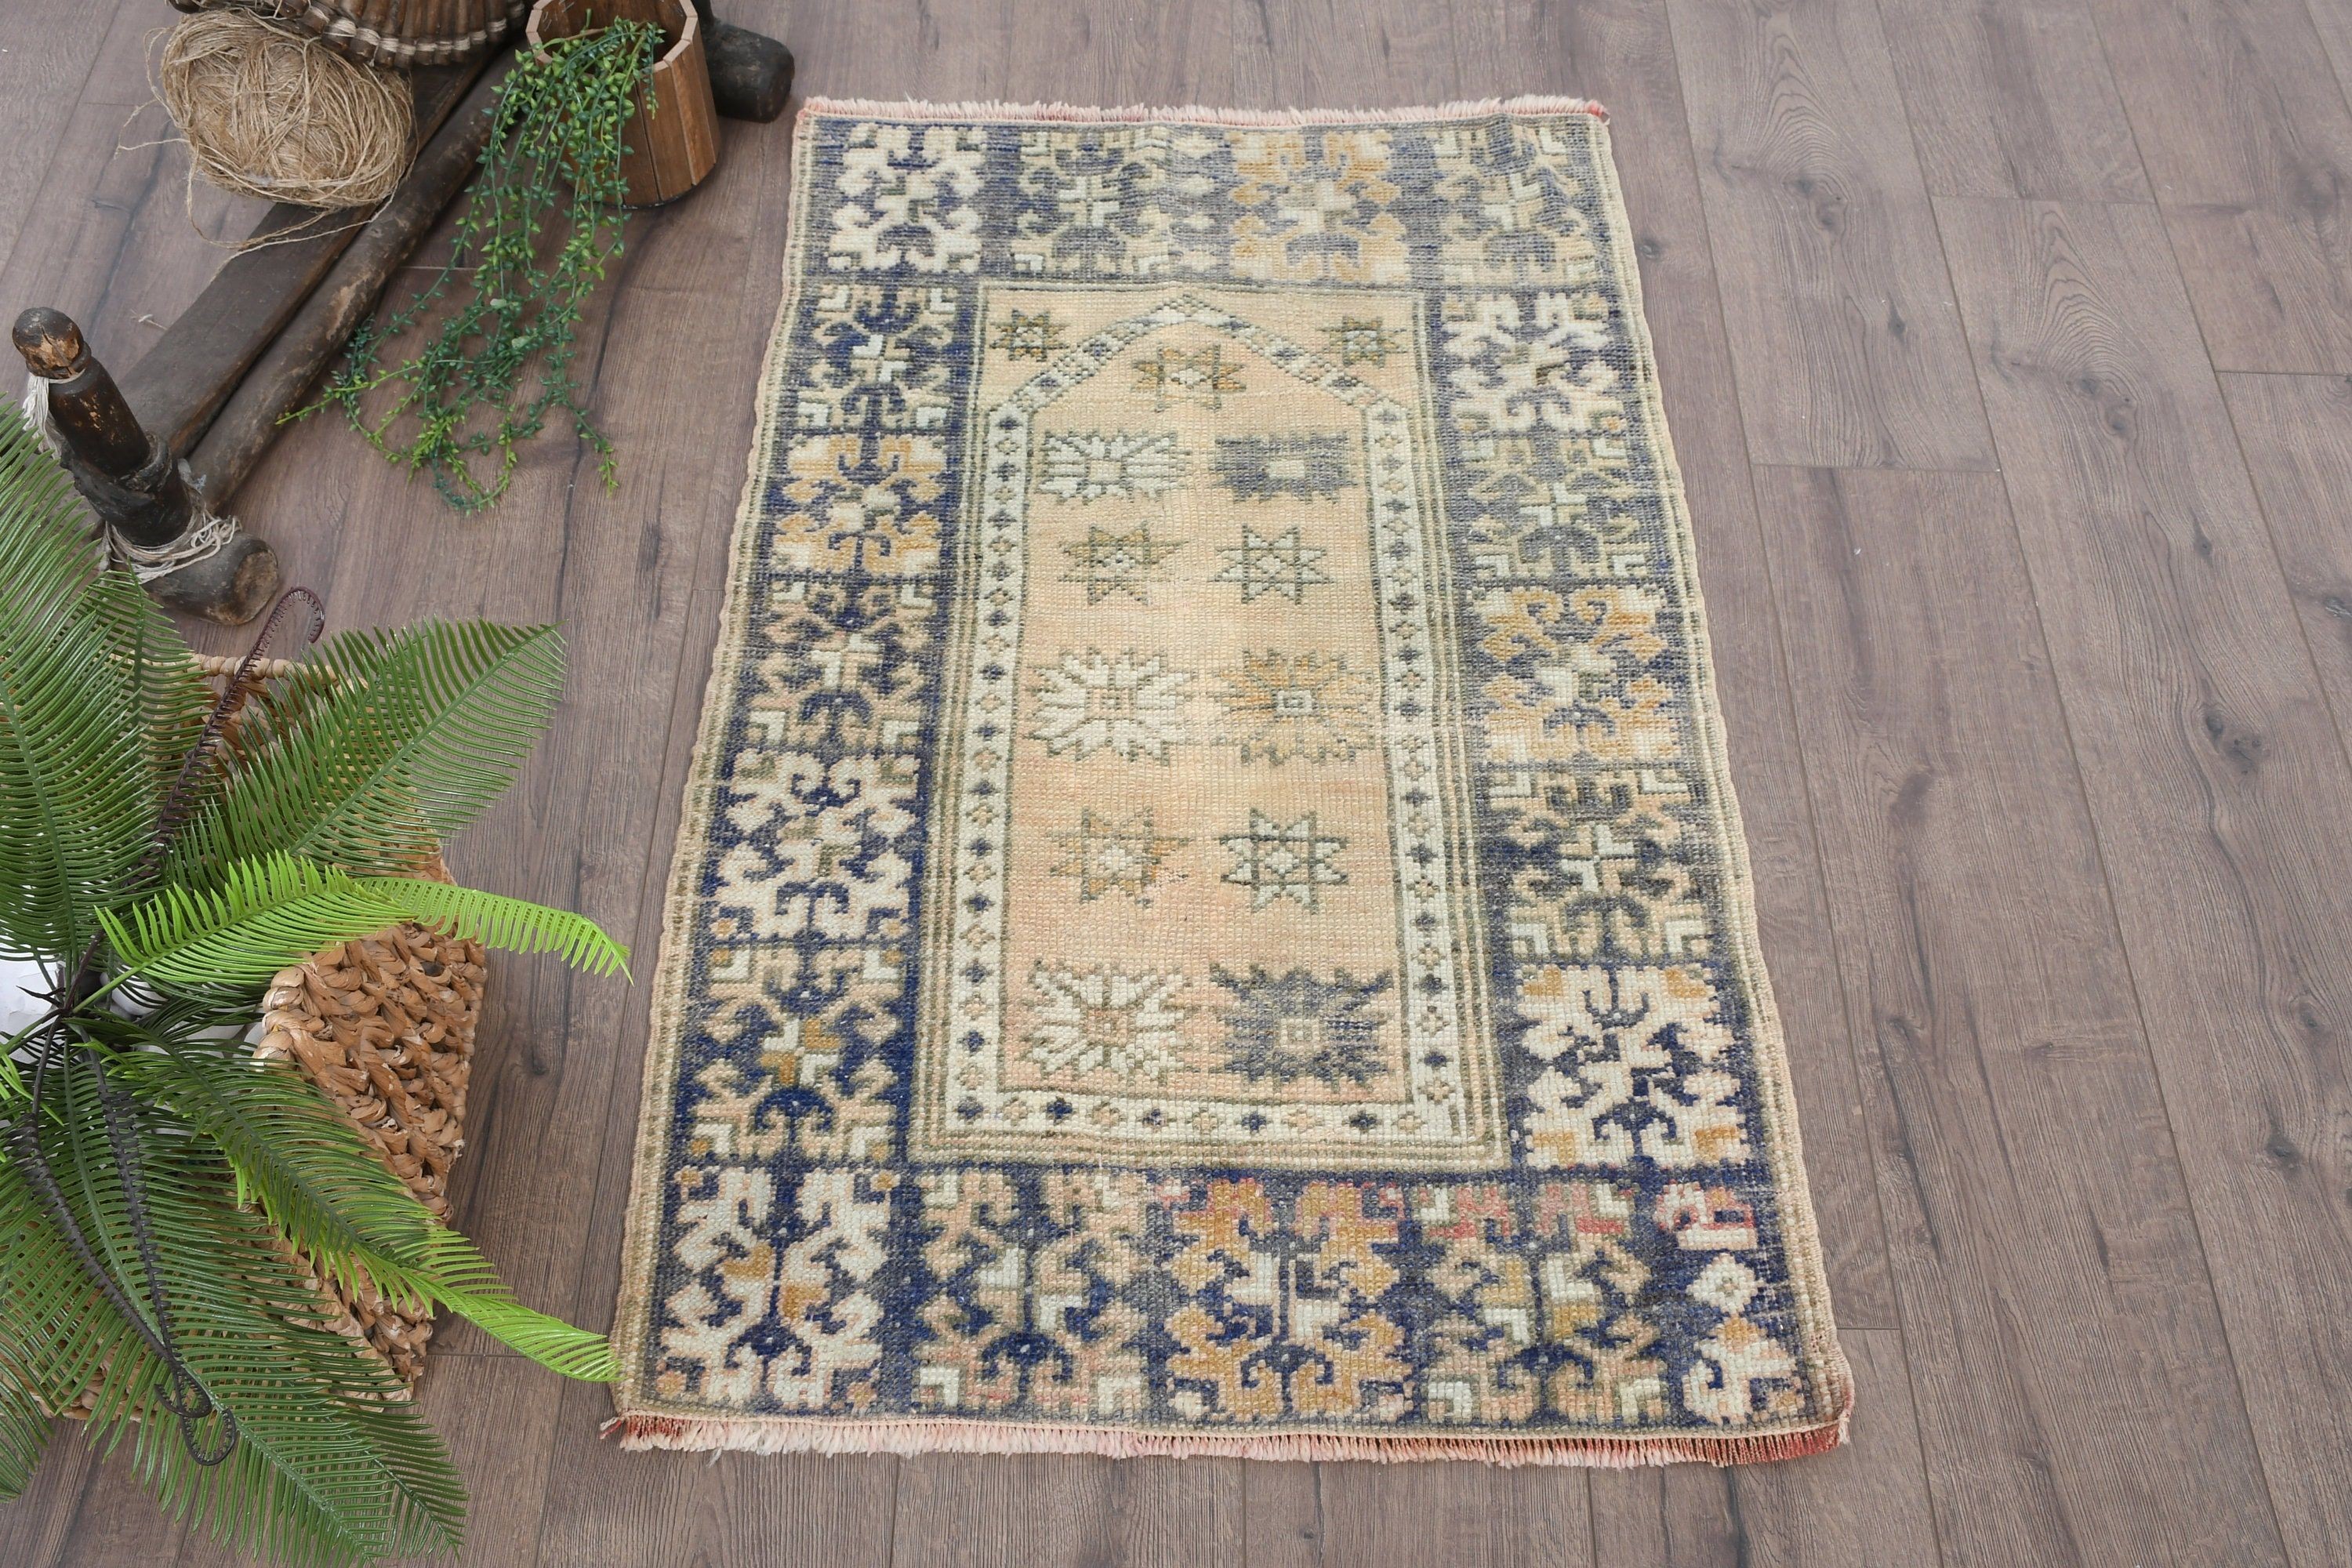 Rugs for Kitchen, Turkish Rugs, Entry Rug, Pale Rugs, Floor Rug, Yellow Wool Rug, Oushak Rug, Bath Rugs, Vintage Rug, 2.3x3.5 ft Small Rug